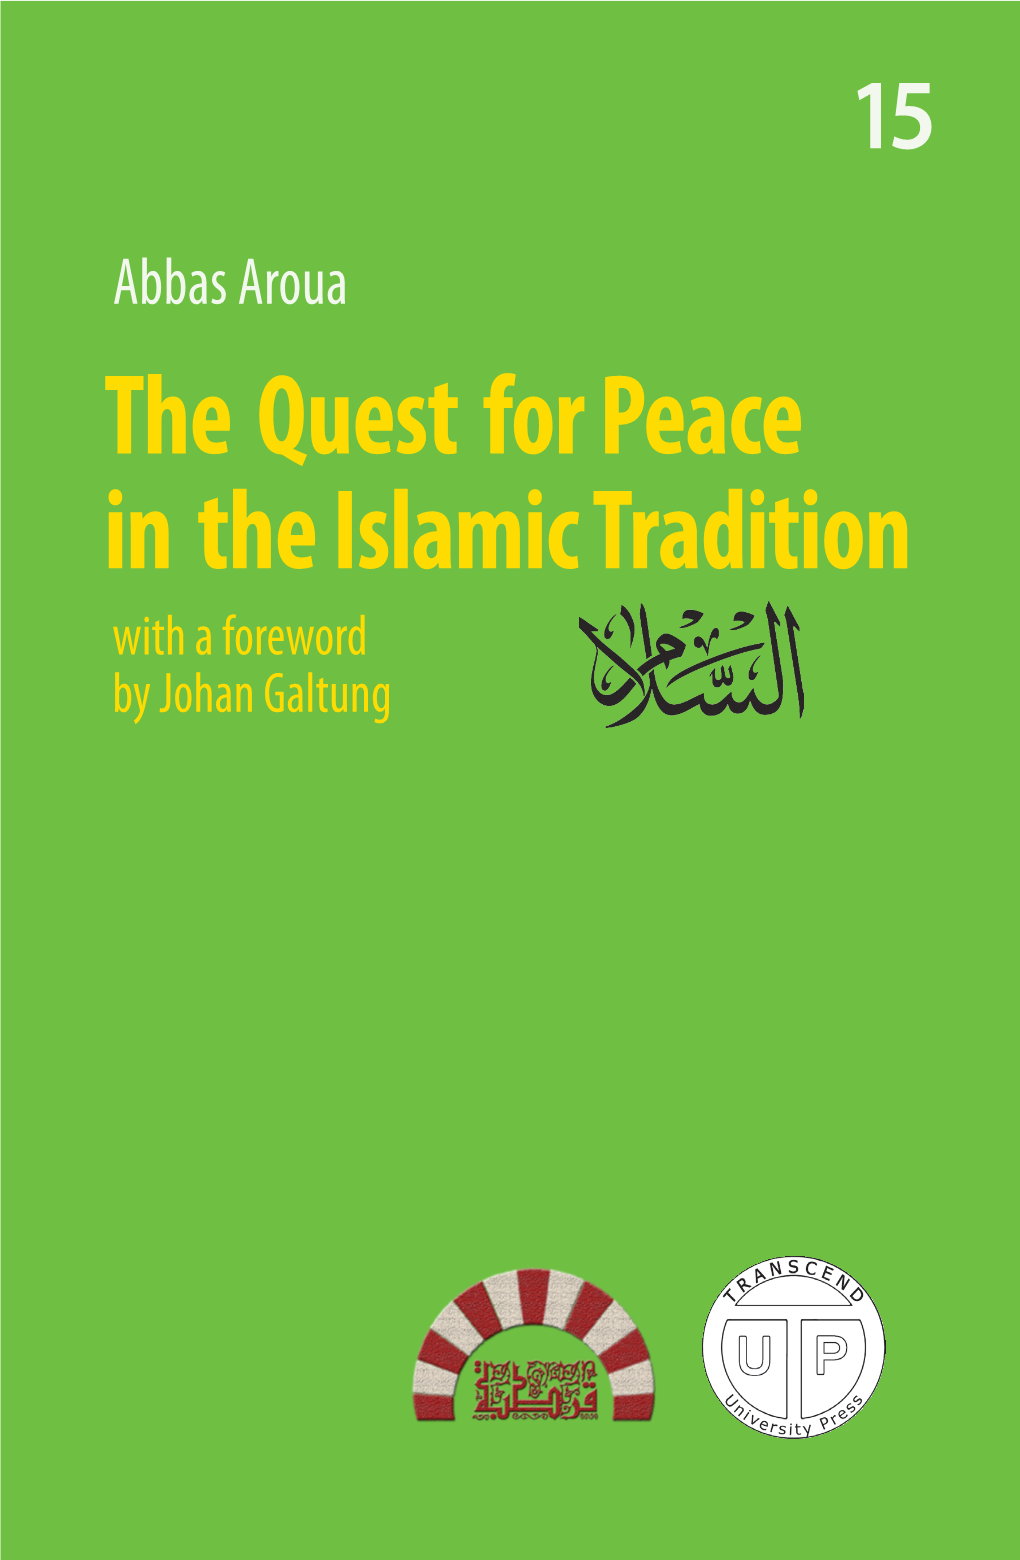 The Quest for Peace in the Islamic Tradition